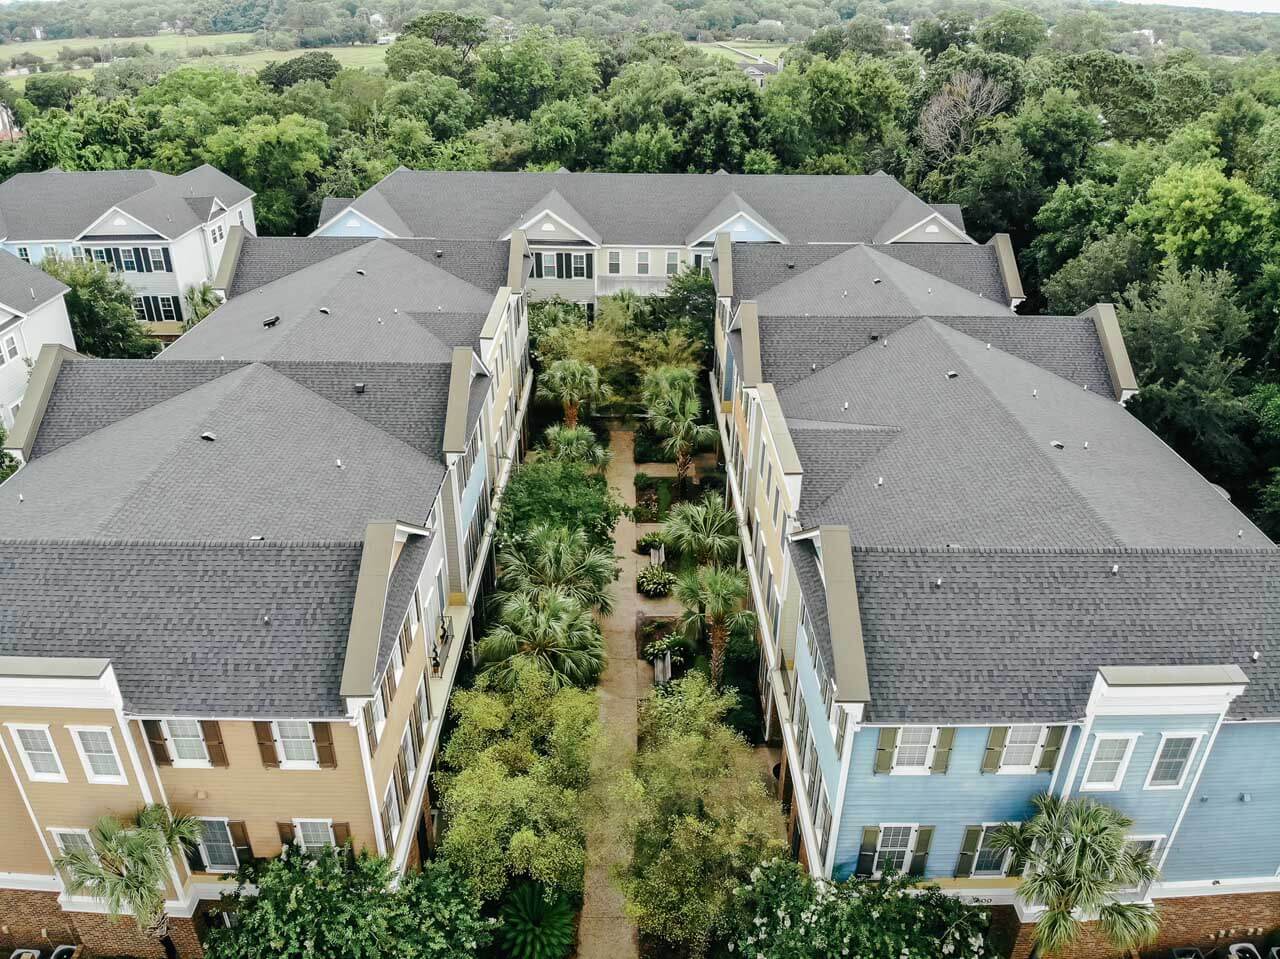 Aerial view of a multi-family townhome complex with a gray shingle roof